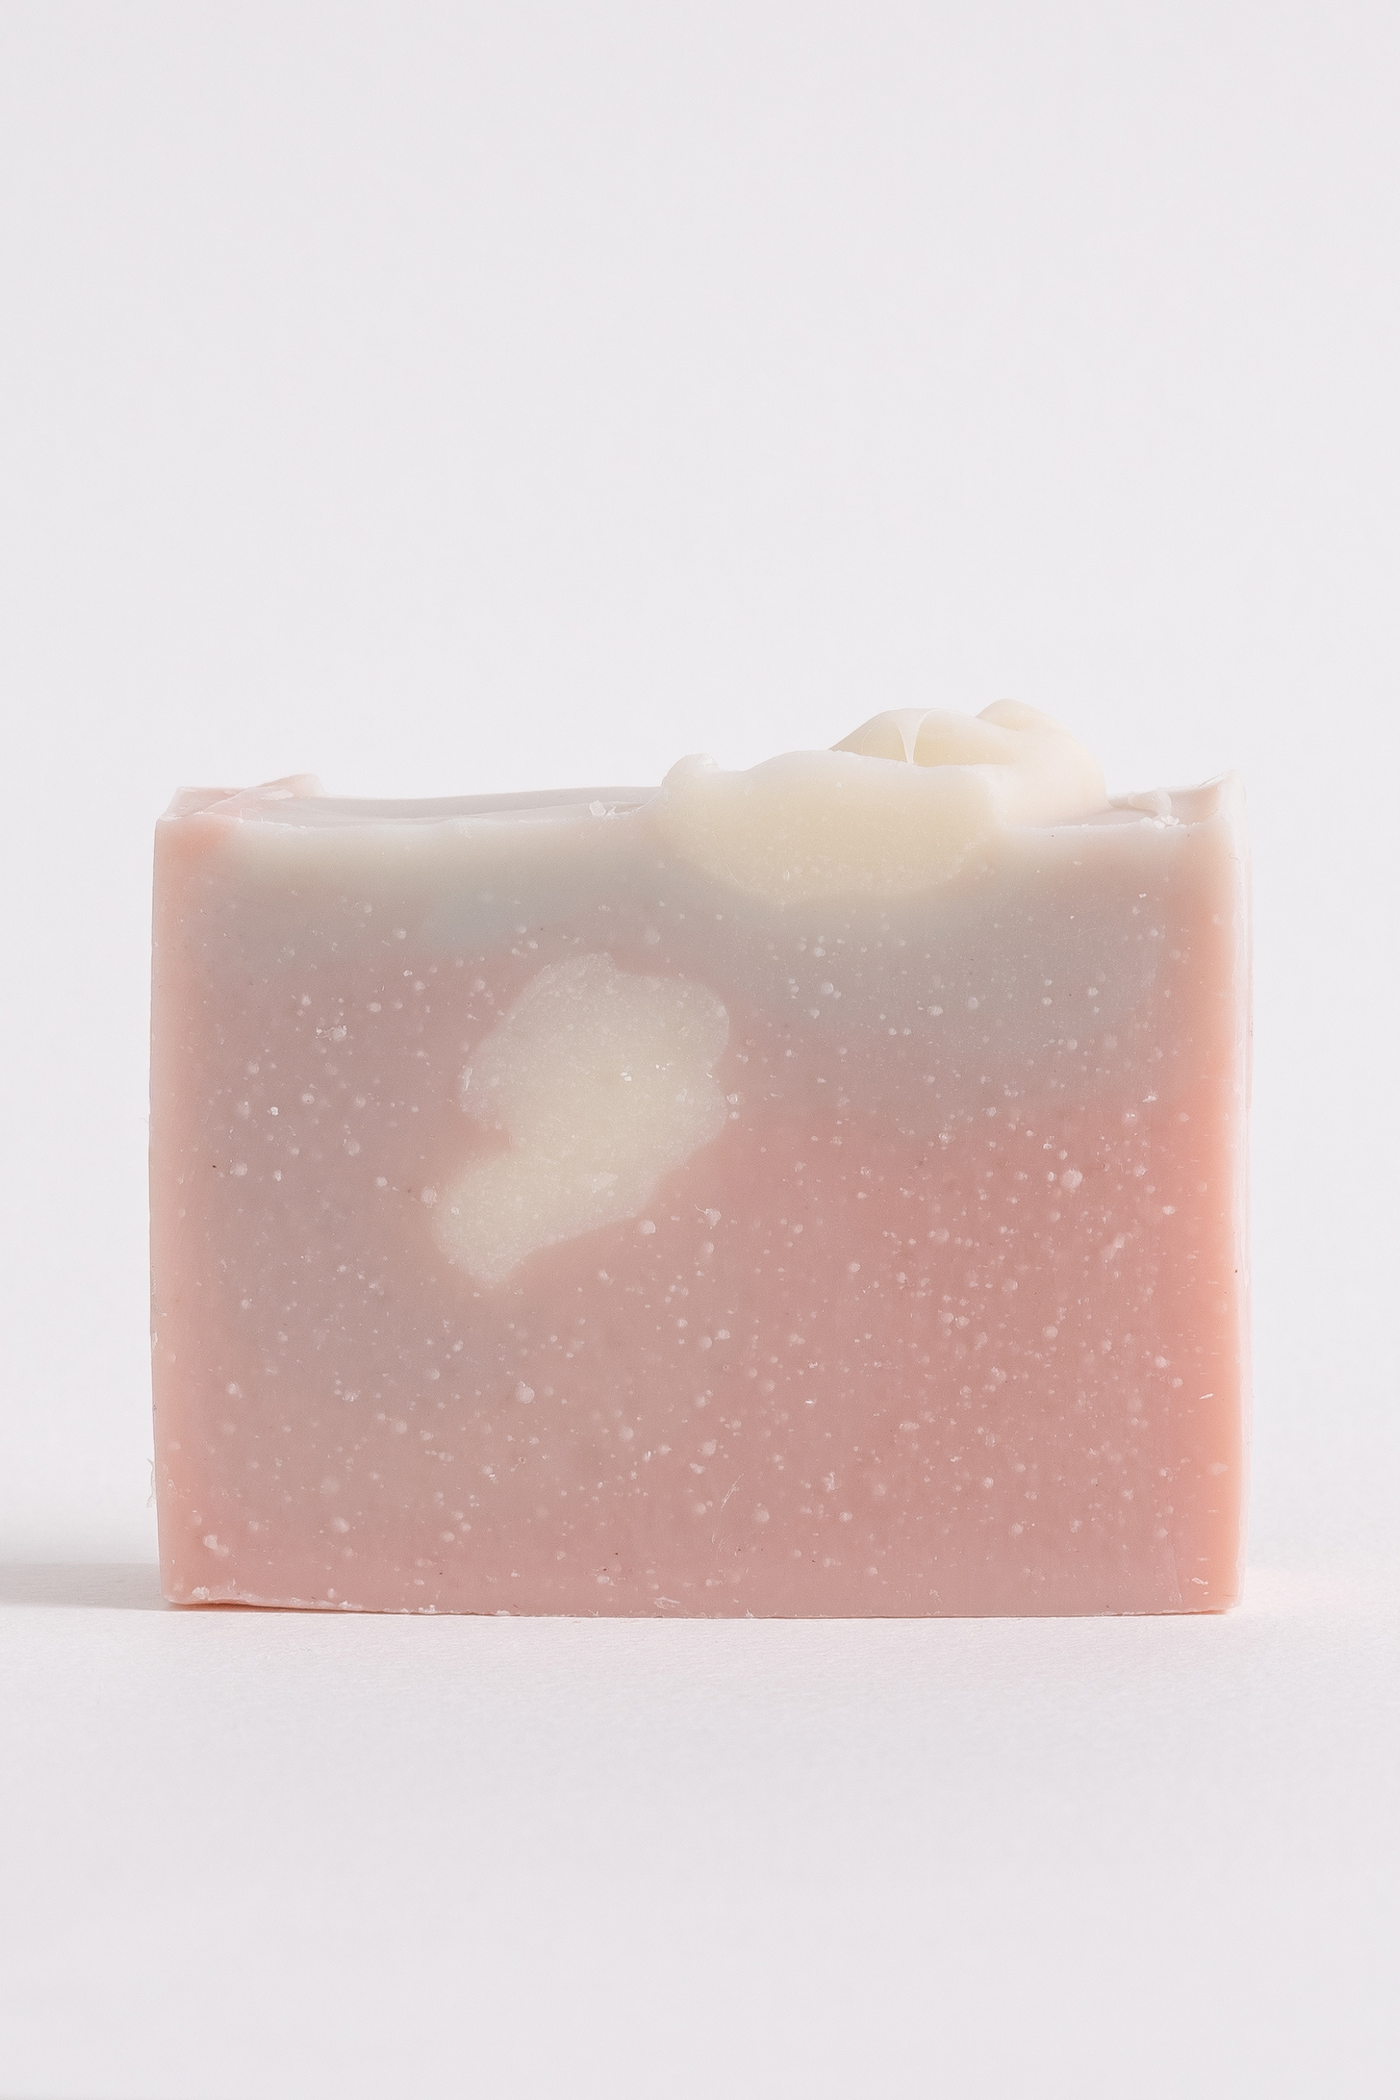 Gentle Mood Calm Mood Bar, available on ZERRIN with free Singapore shipping